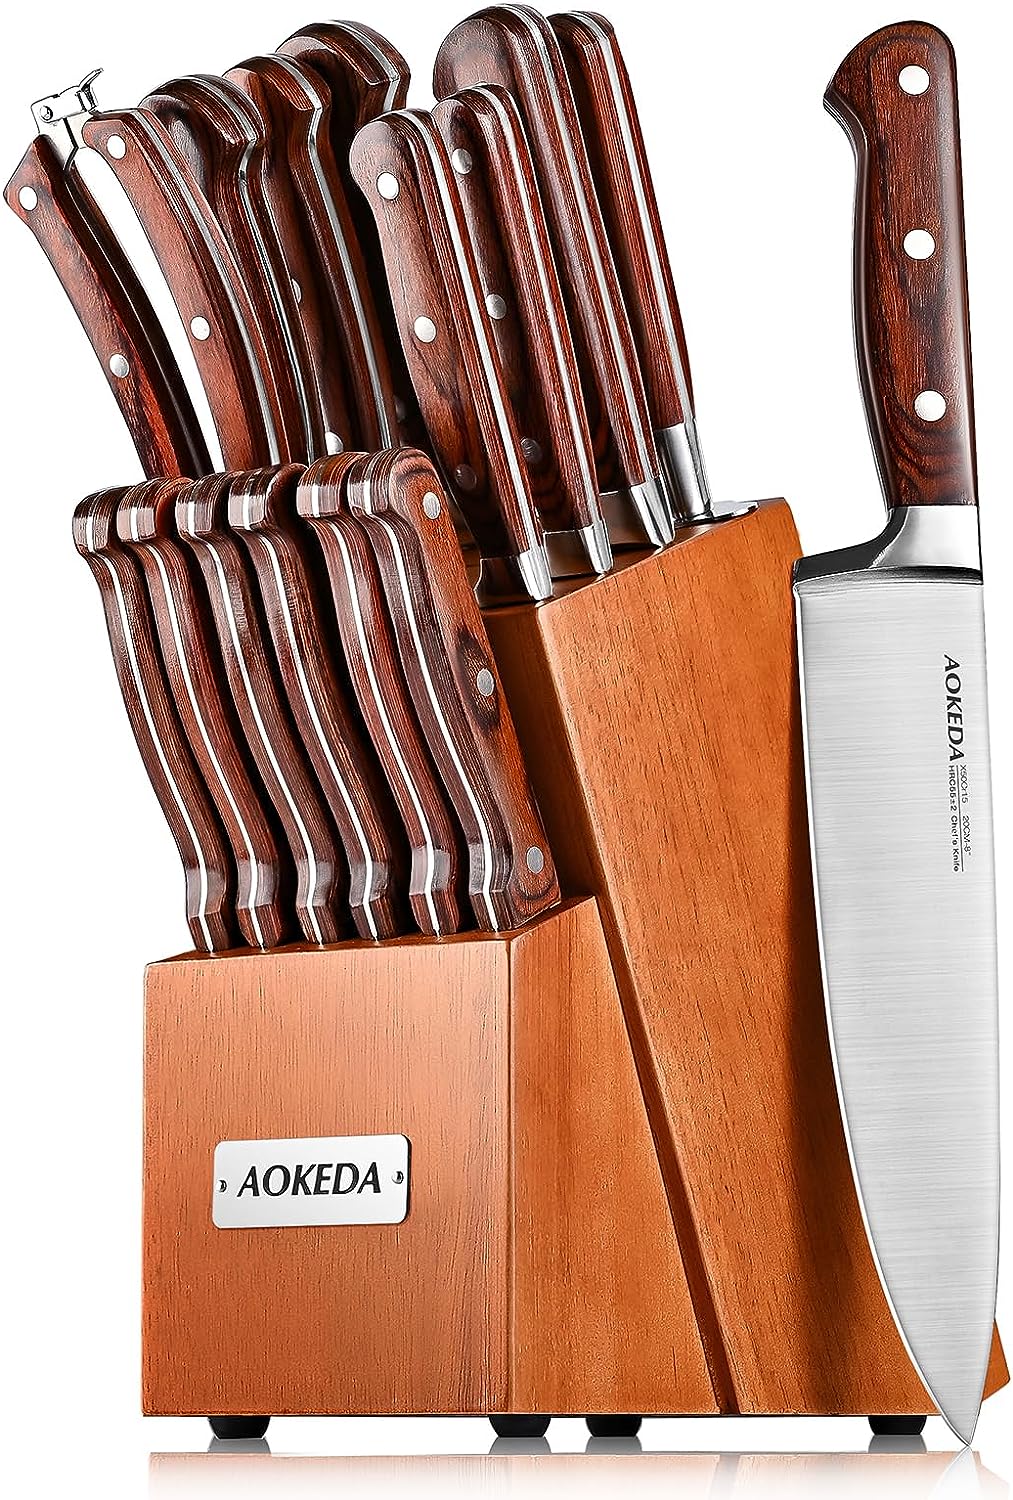 CAROTE 14 Pieces Knife Set with Wooden Block Stainless Steel Knives  Dishwasher Safe with Sharp Blade Ergonomic Handle Forged Triple Rivet-Pearl  White